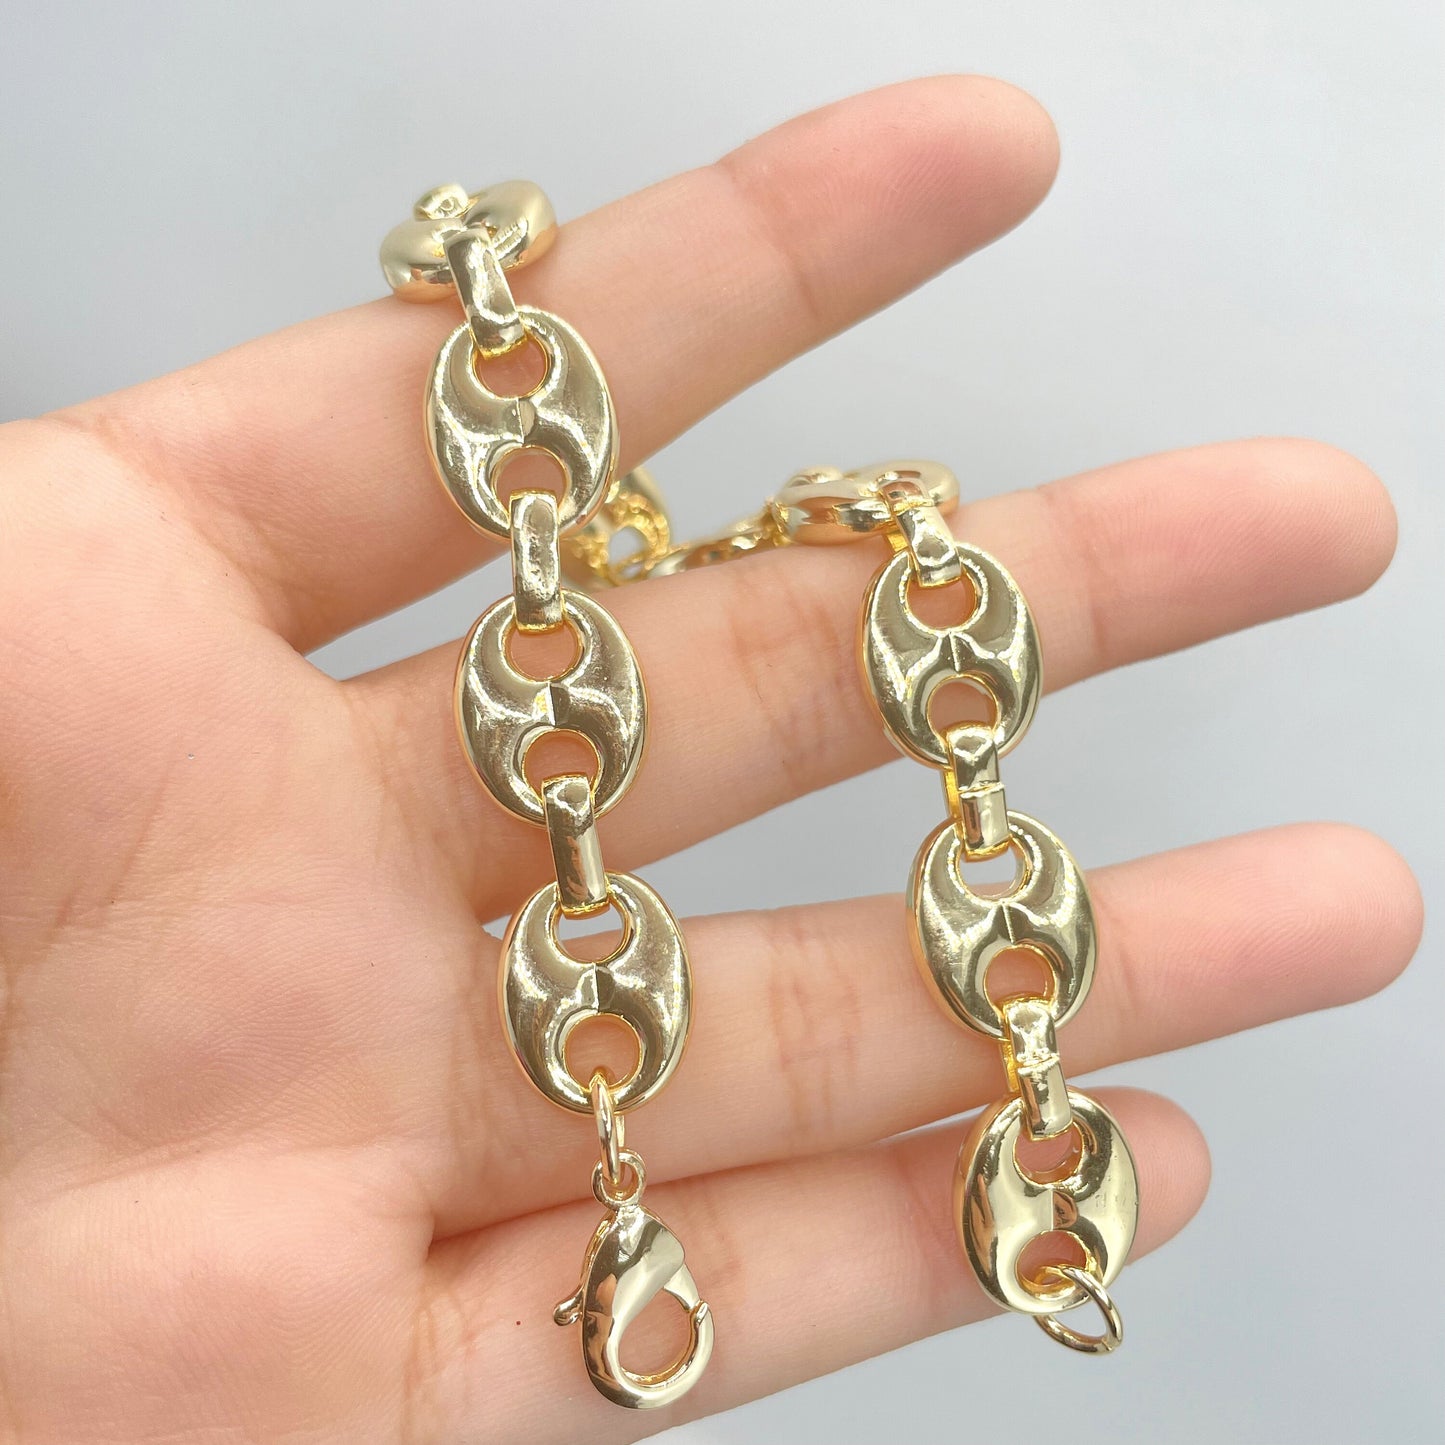 18k Gold Filled 12mm Puffy Mariner Style Link Chain Bracelet, Lobster Claw, Wholesale Jewelry Making Supplies